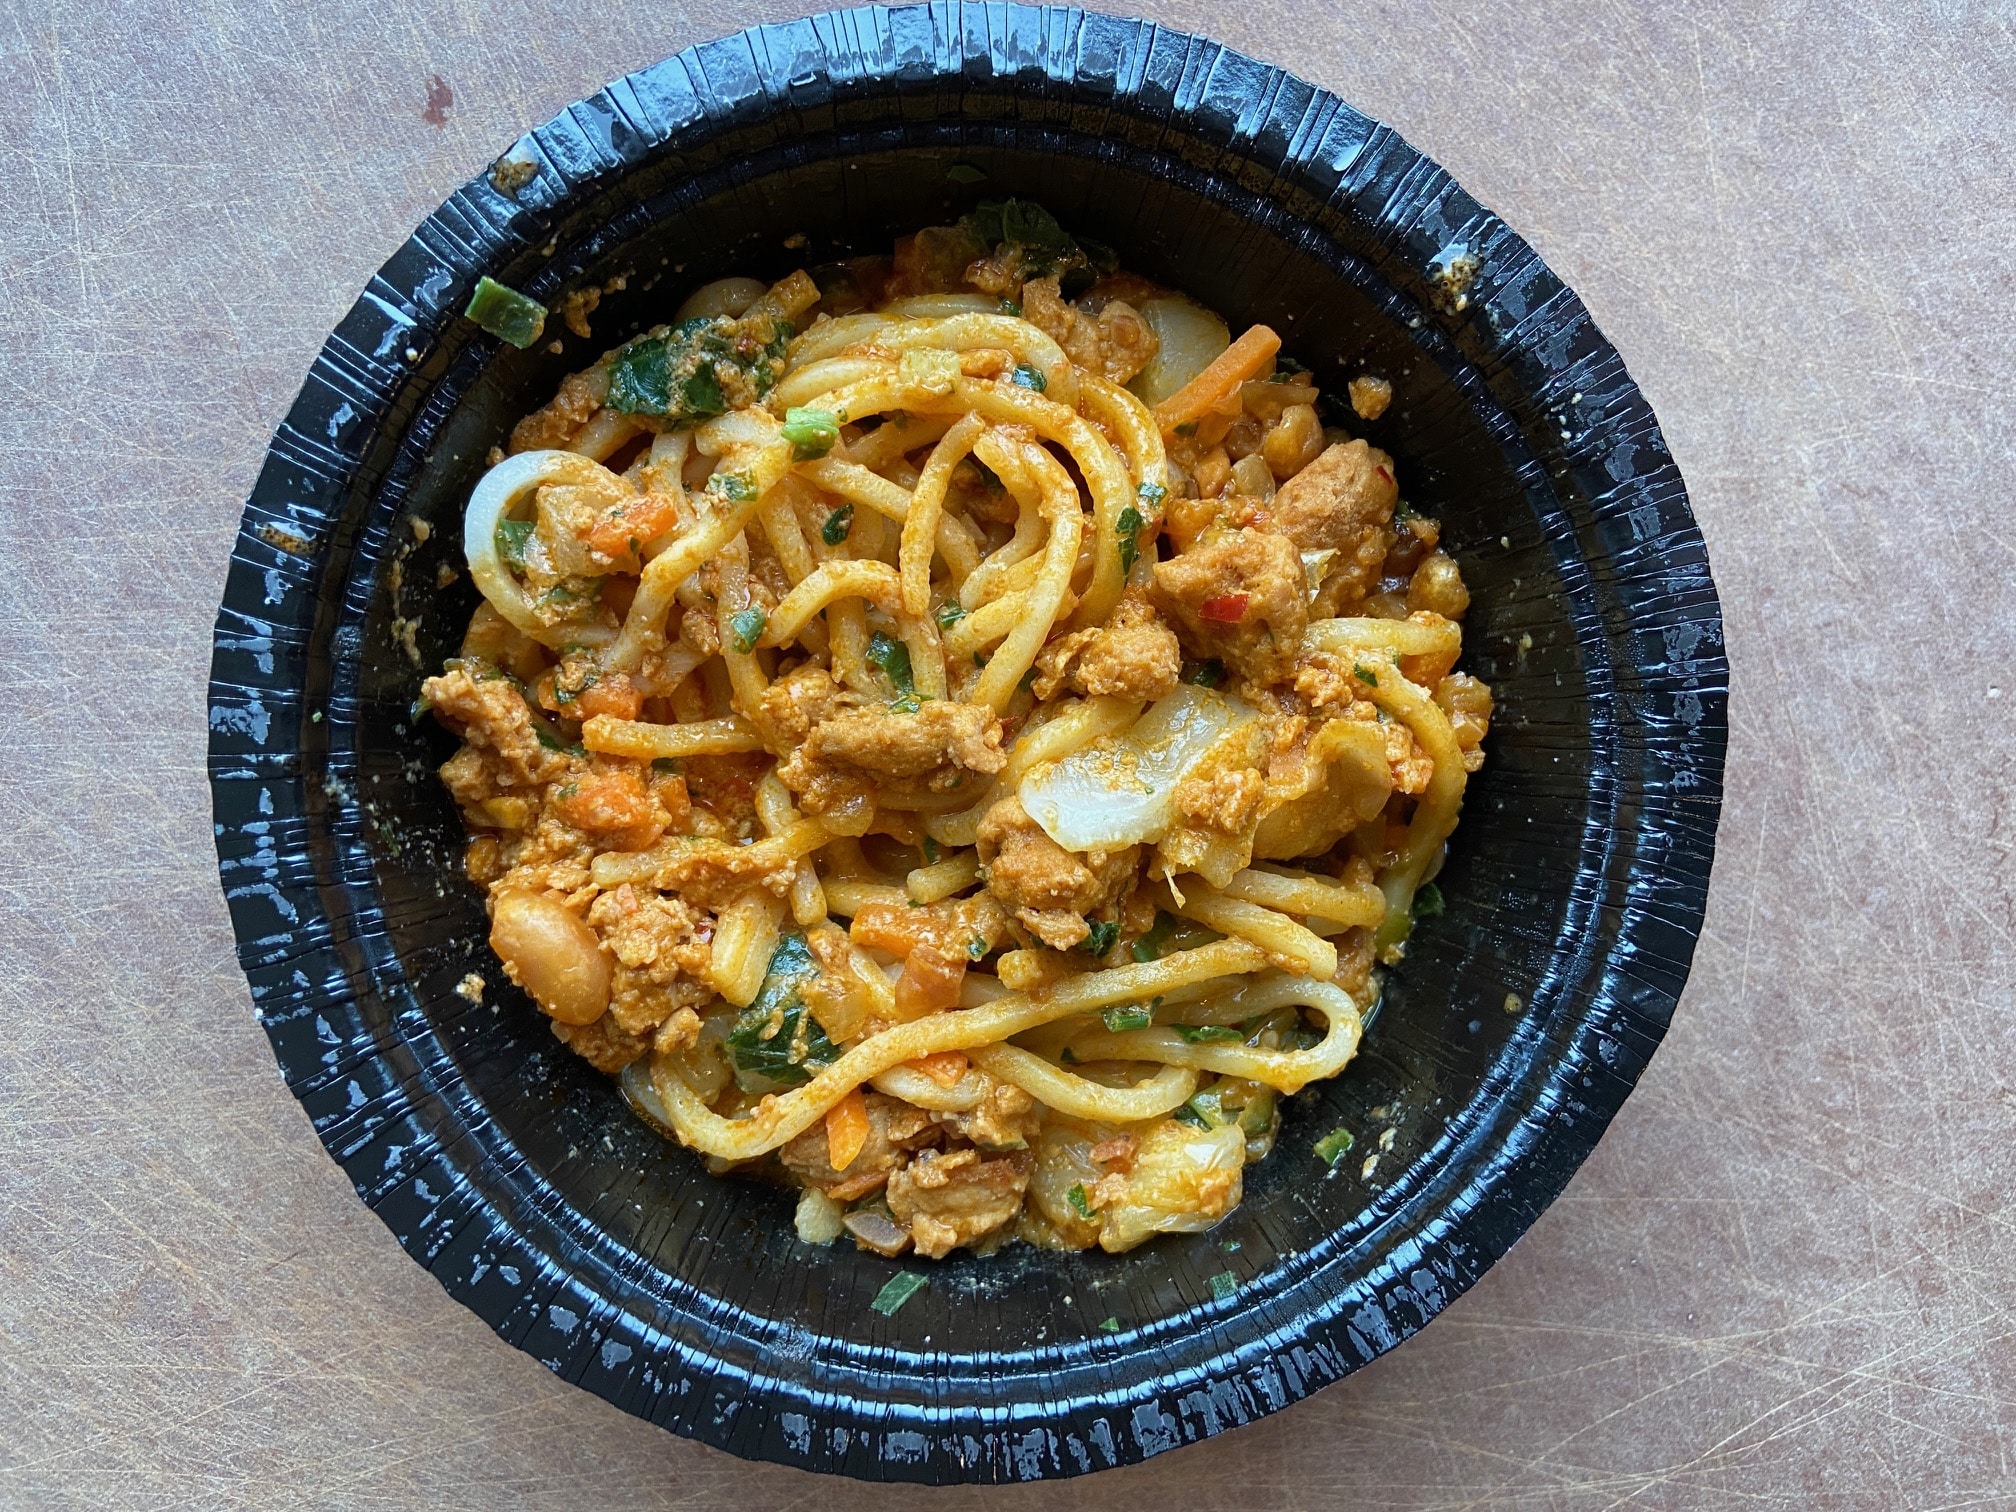 Trader Joe's Spicy Peanutty Noodle Bowl Ready to eat